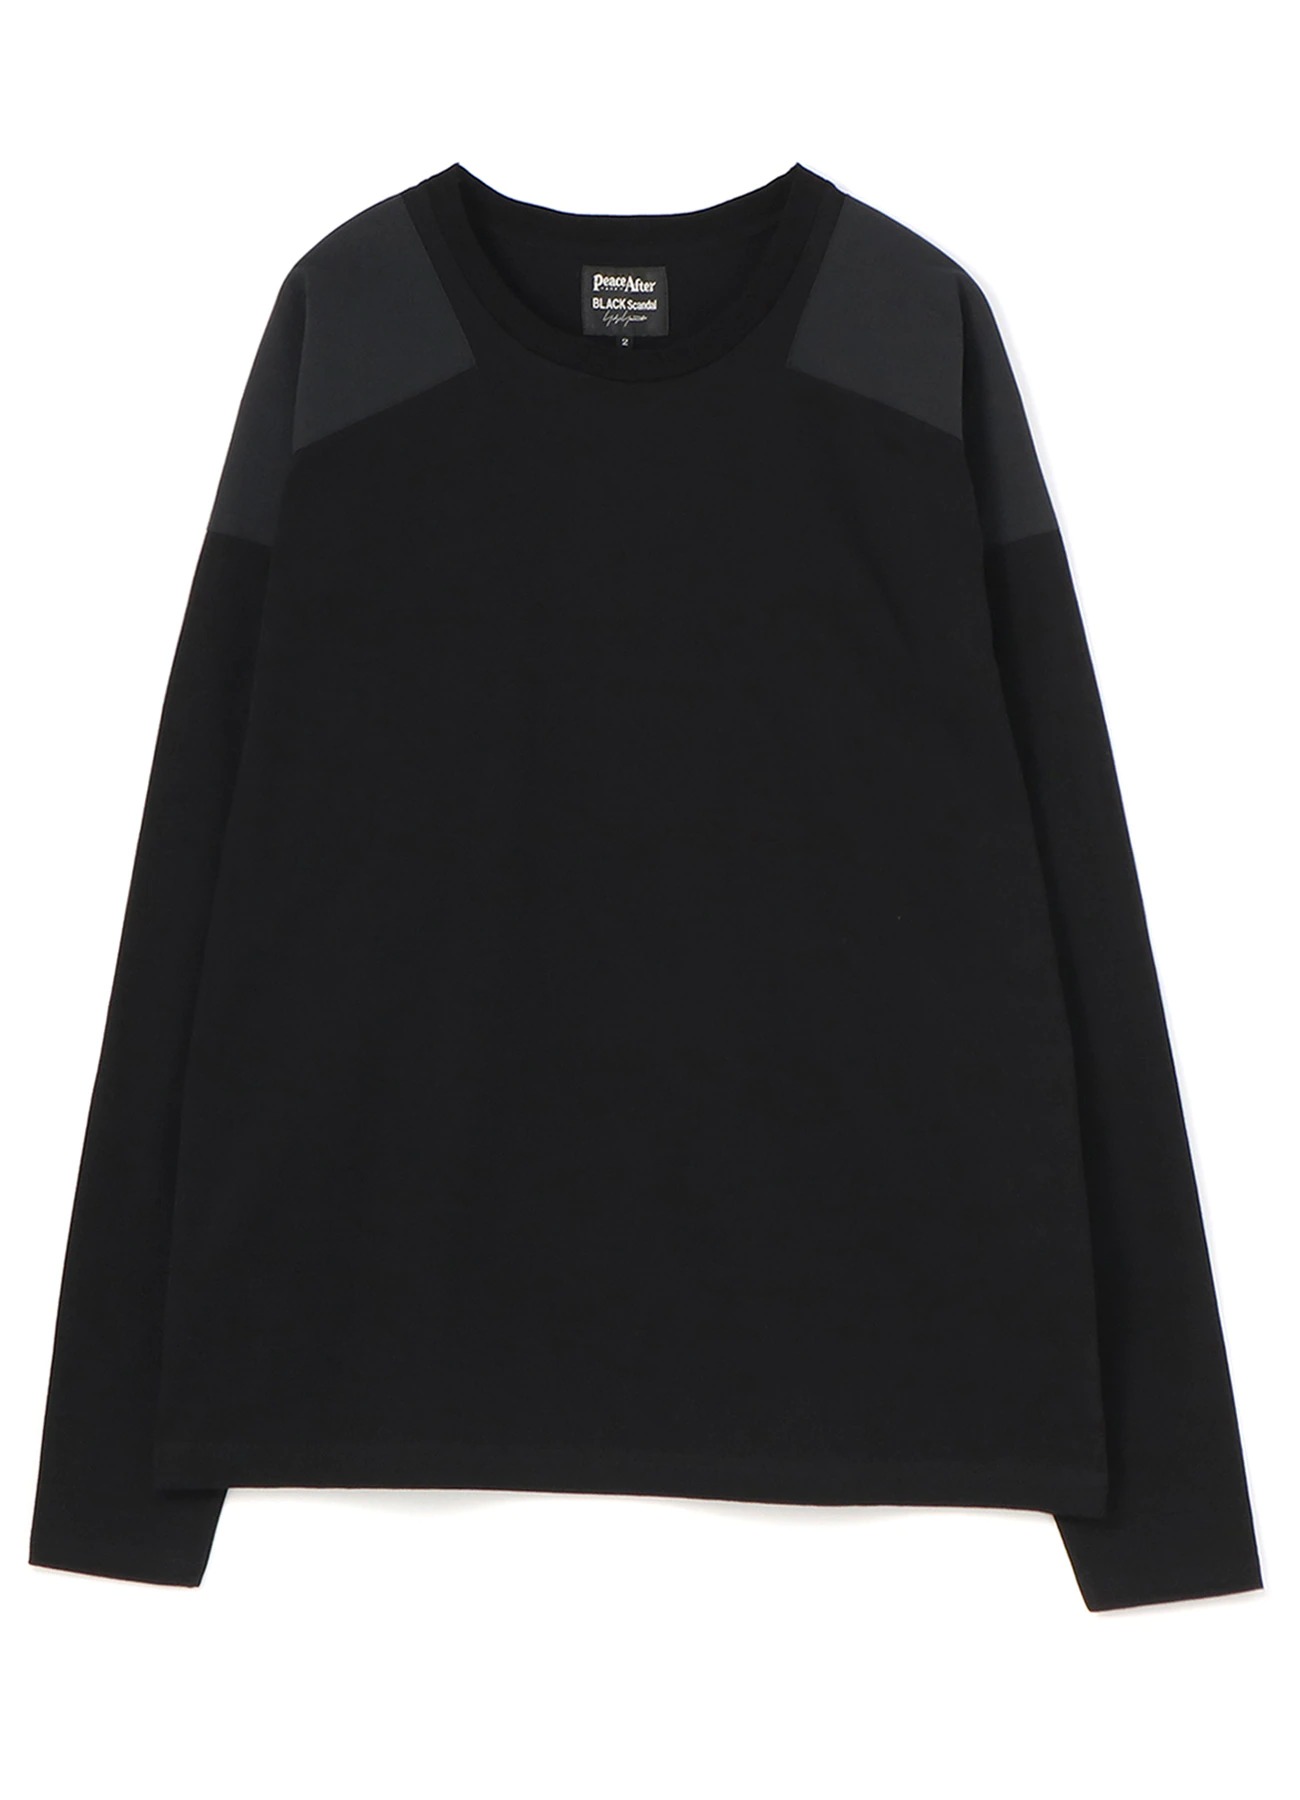 Yohji Yamamoto Black Scandal｜PEACE AND AFTER ROUND NECK SHOULDER PATCH LONG SLEEVES TEE HG-T93-999-1 US＄365